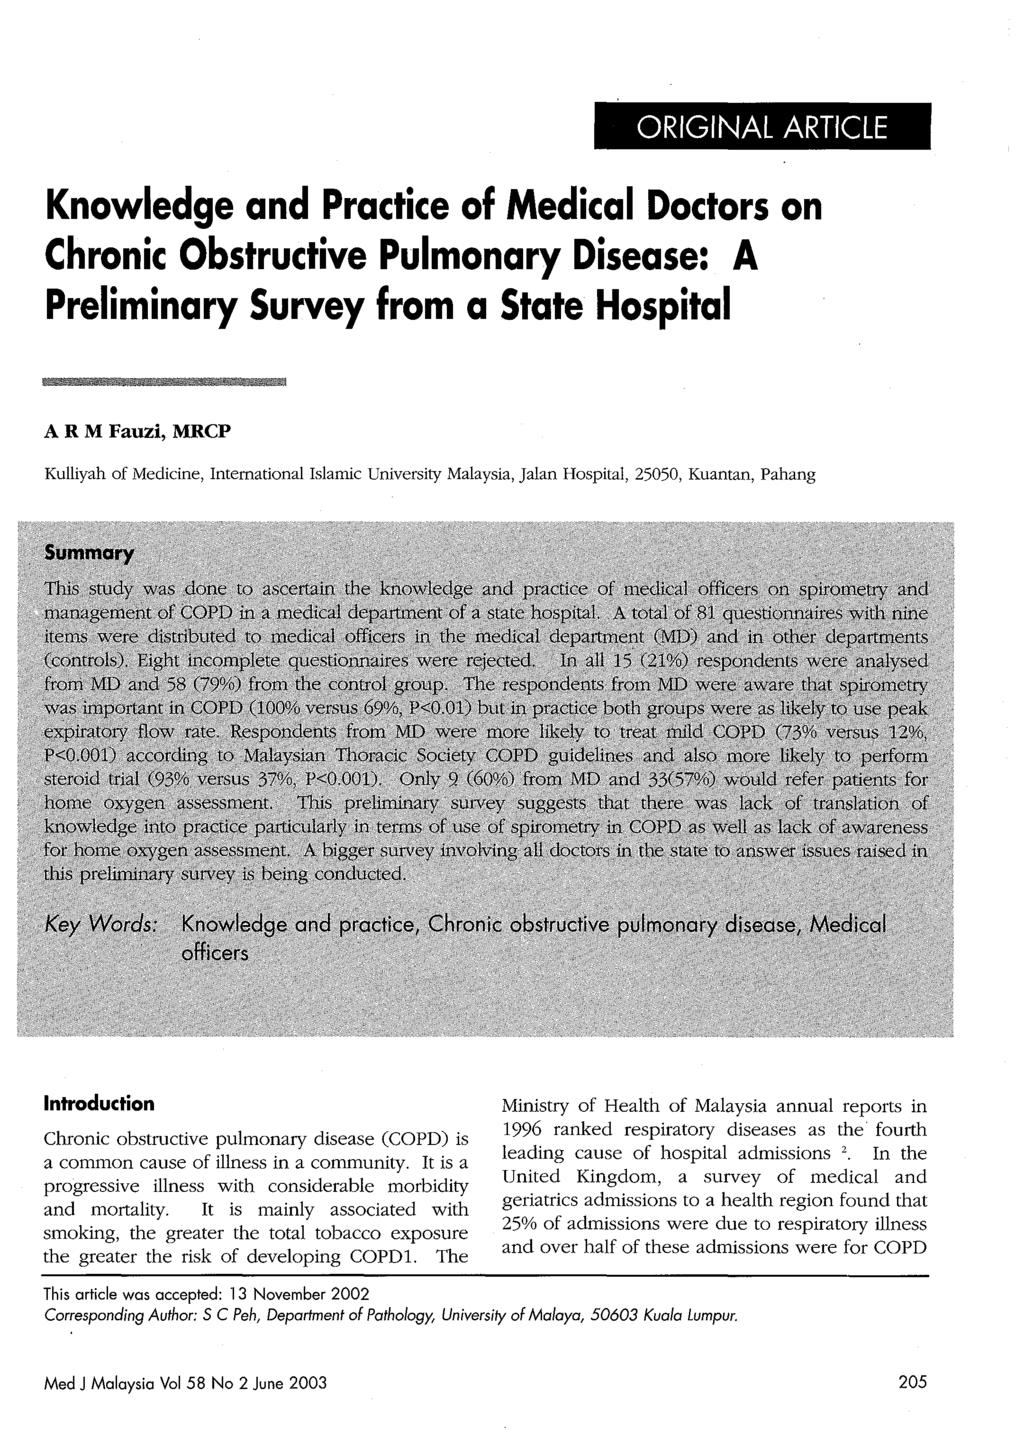 ORIGINAL ARTICLE Knowledge and Practice of Medical Doctors on Chronic Obstructive Pulmonary Disease: A Preliminary Survey from a State Hospital ARM Fauzi, MRCP Kulliyah of Medicine, International